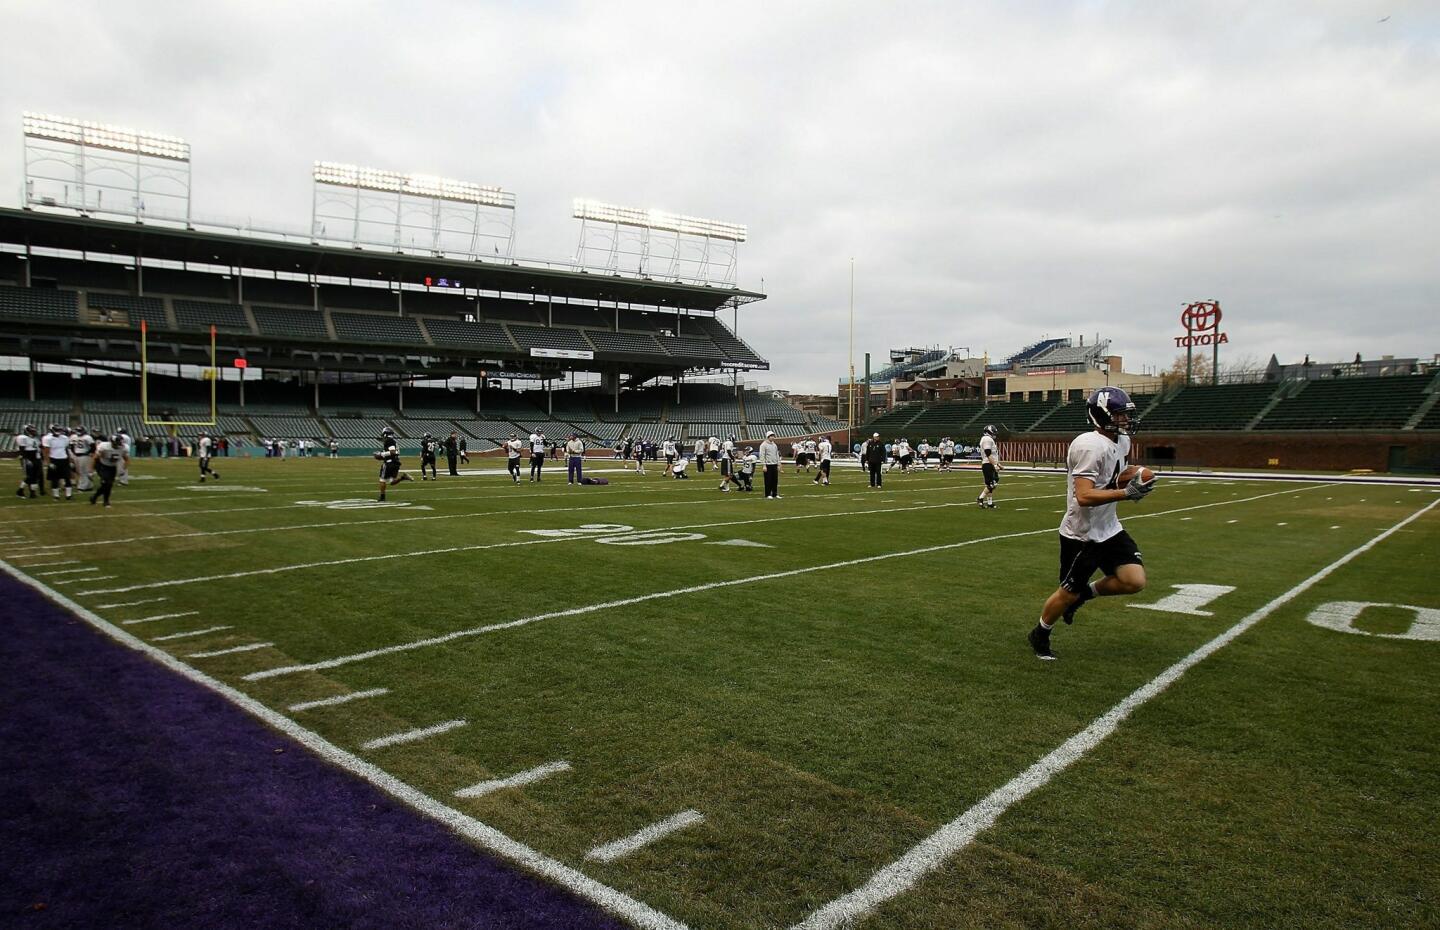 A general view as the Northwestern practices for a game against Illinois at Wrigley Field.